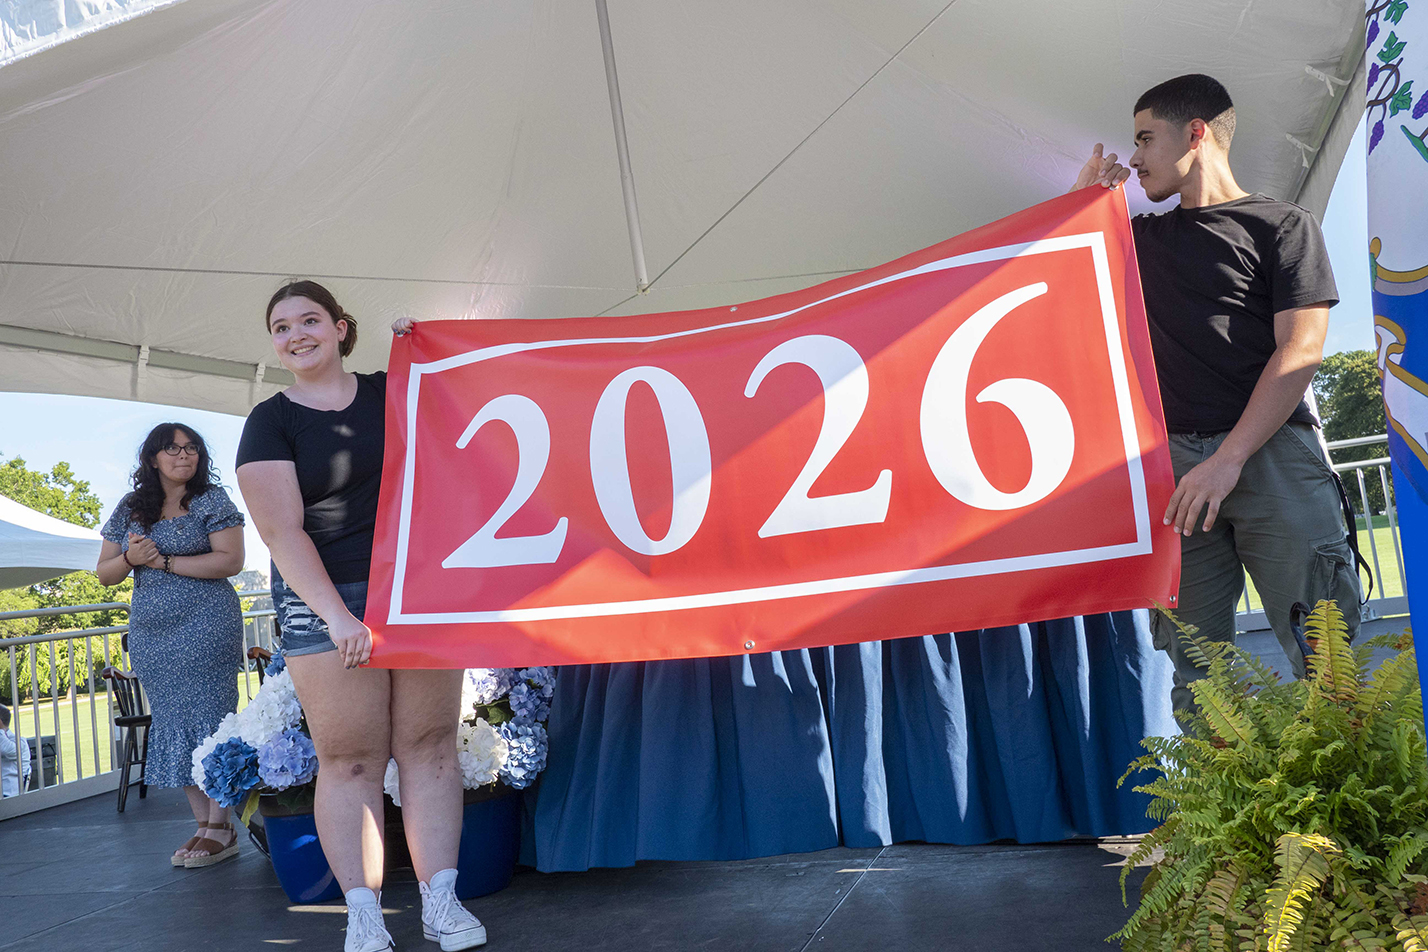 Kersyn McBride '26 and Josiah Rondon '26 present the Class of 2026 banner